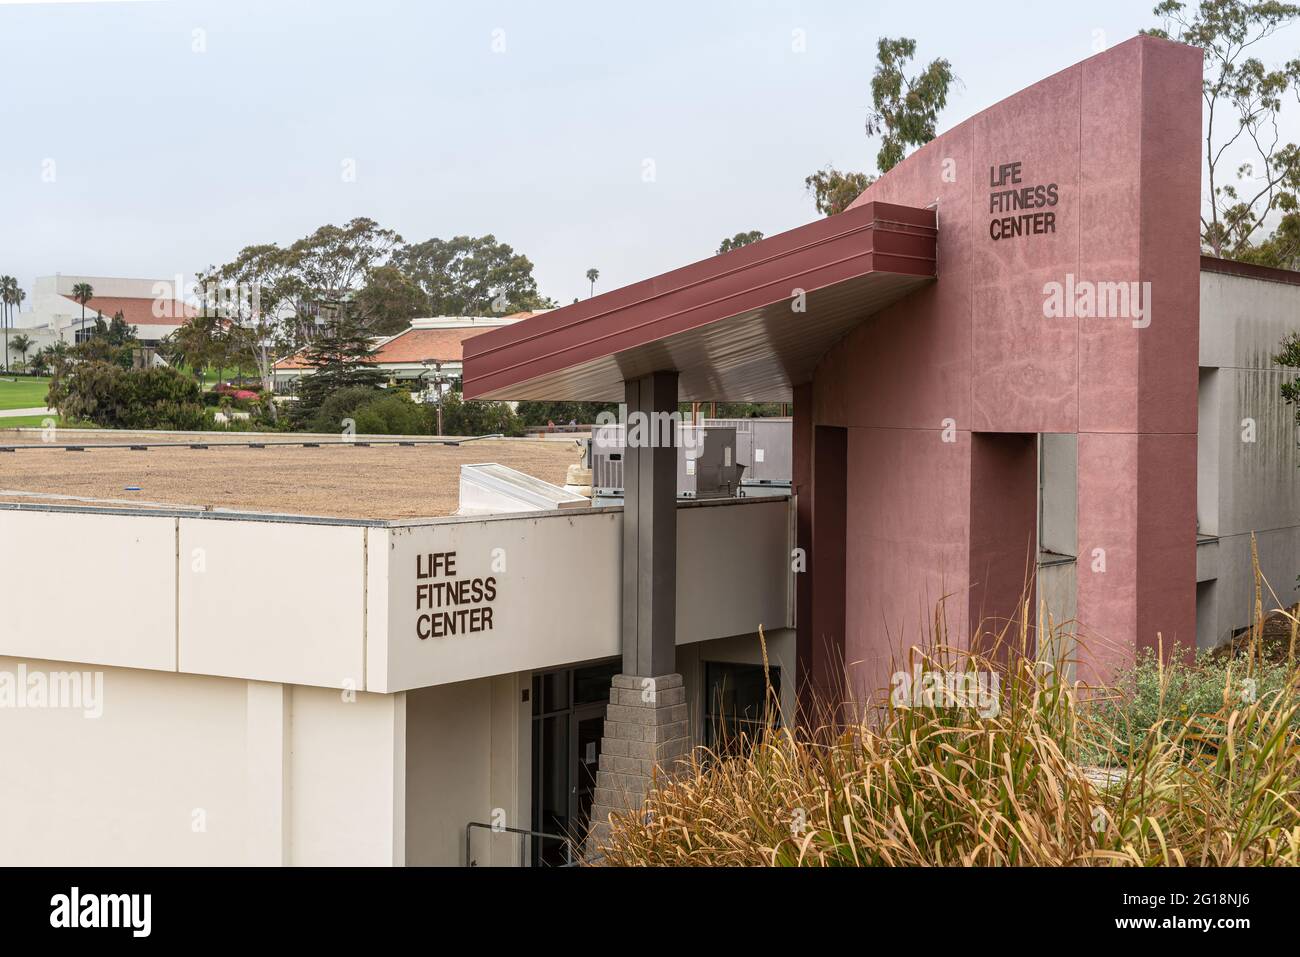 Santa Barbara, CA, USA - June 2, 2021: City College facilities. Life Fitness Center building in beige and red stone. Green foliage and gray sky. Stock Photo